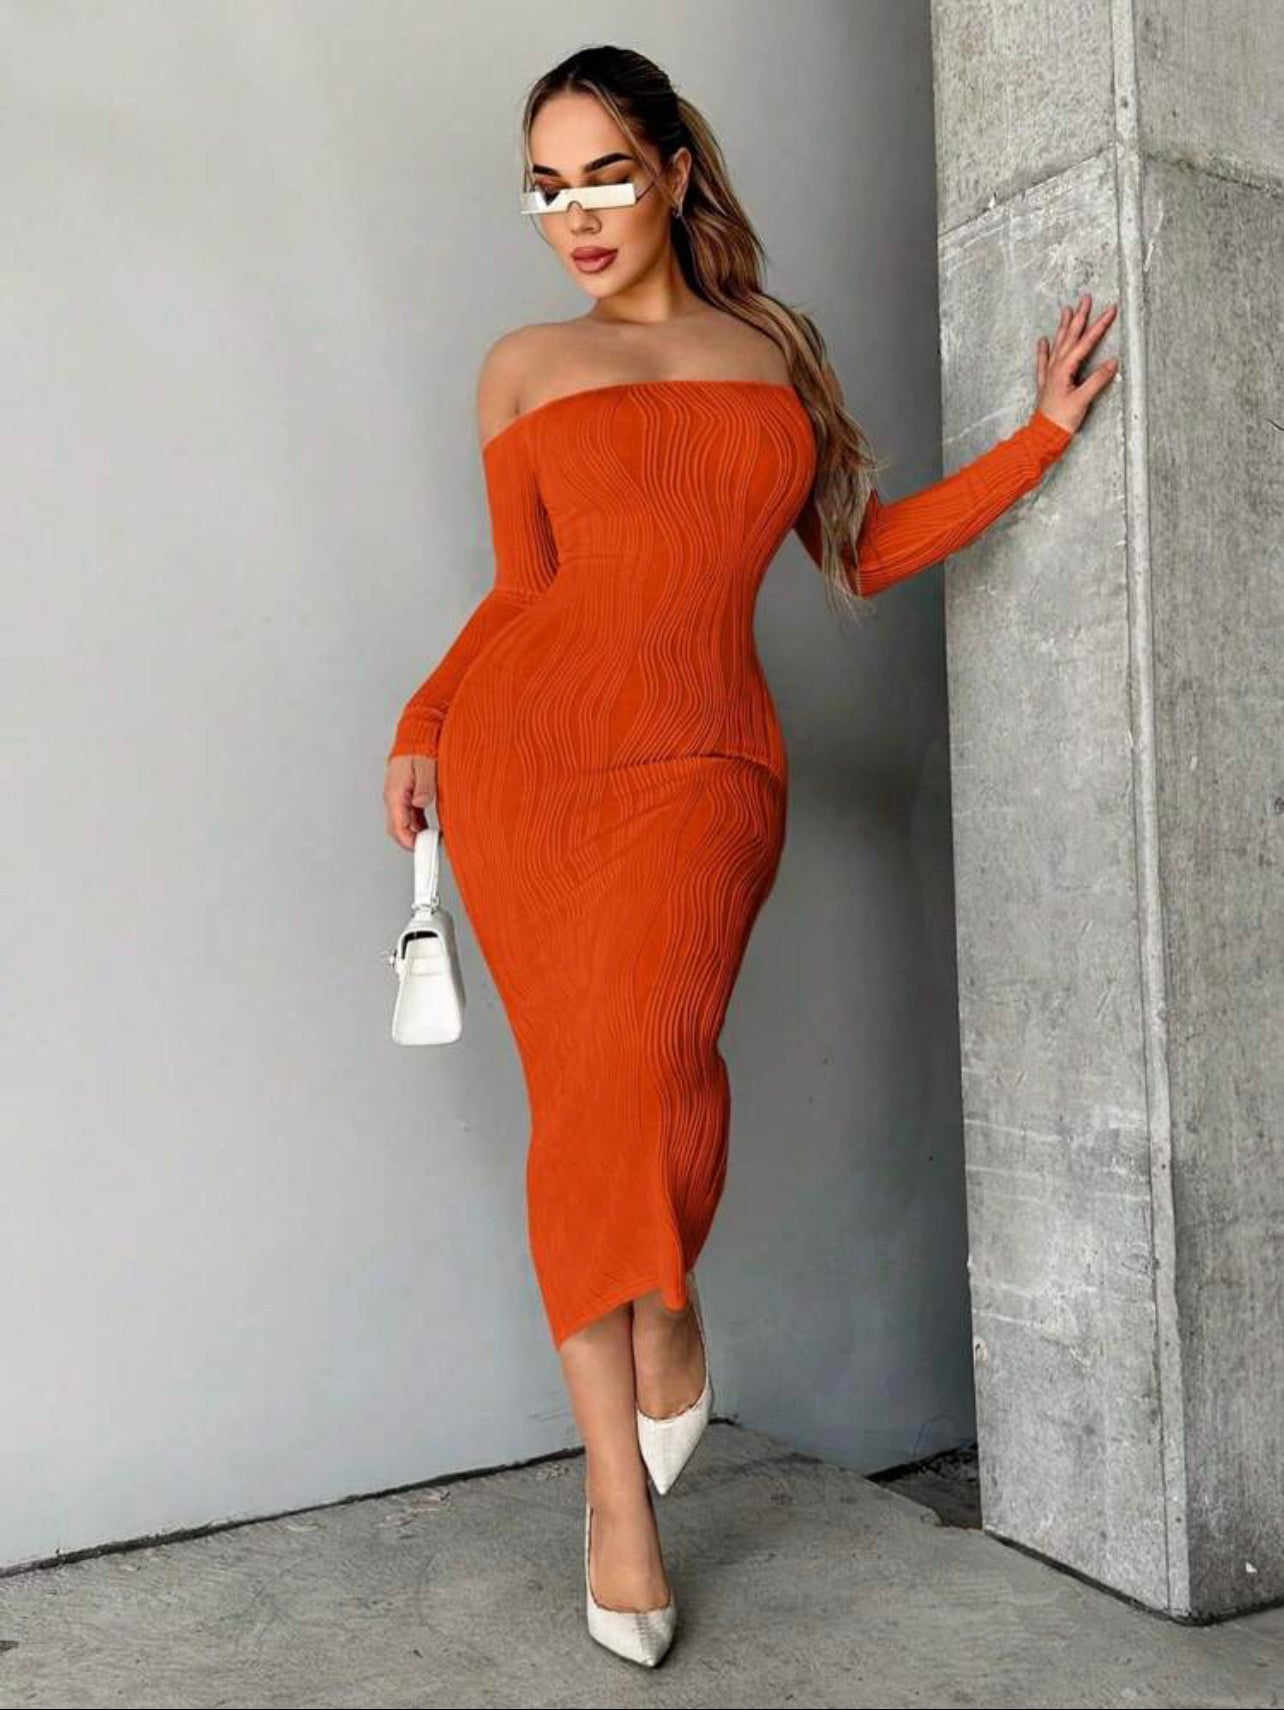 Backless And Off Shoulder Bodycon Dress